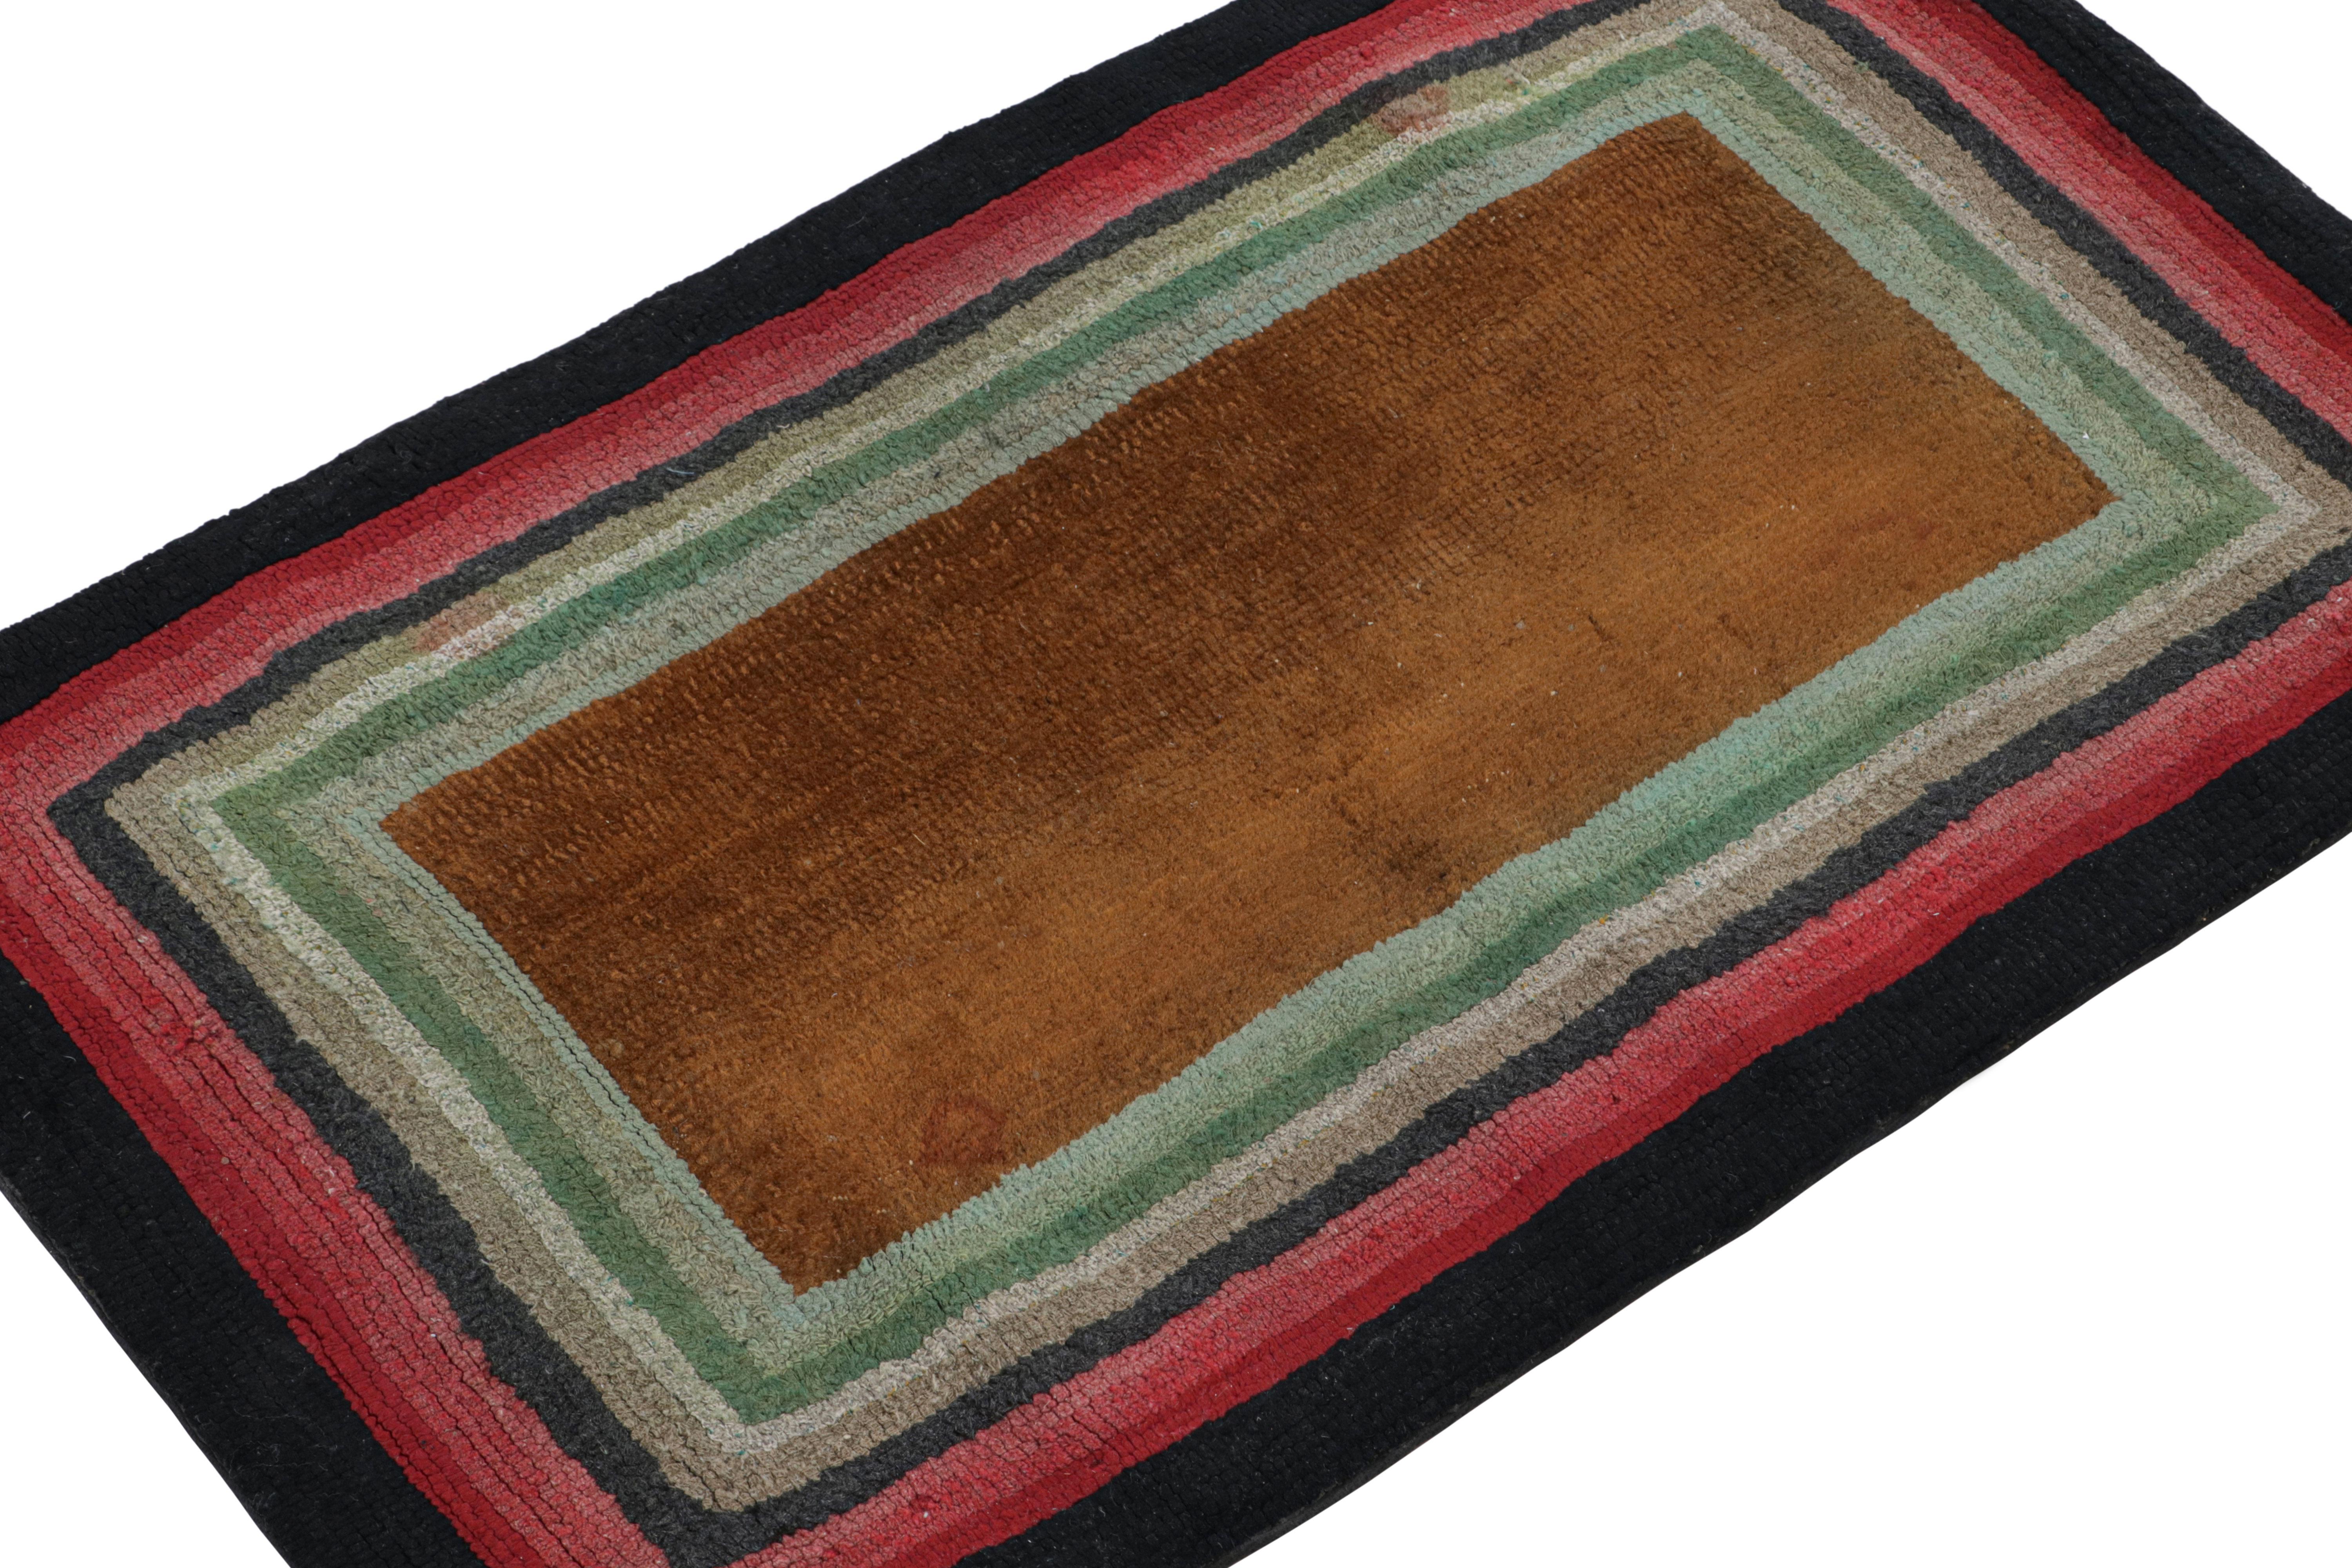 A rare 2x3 antique hooked rug of United States’ provenance, handmade in wool and fabric, circa 1920-1930, featuring polychromatic geometric borders. 

On the Design: 

This collectible piece enjoys layered geometric patterns in multiple colors